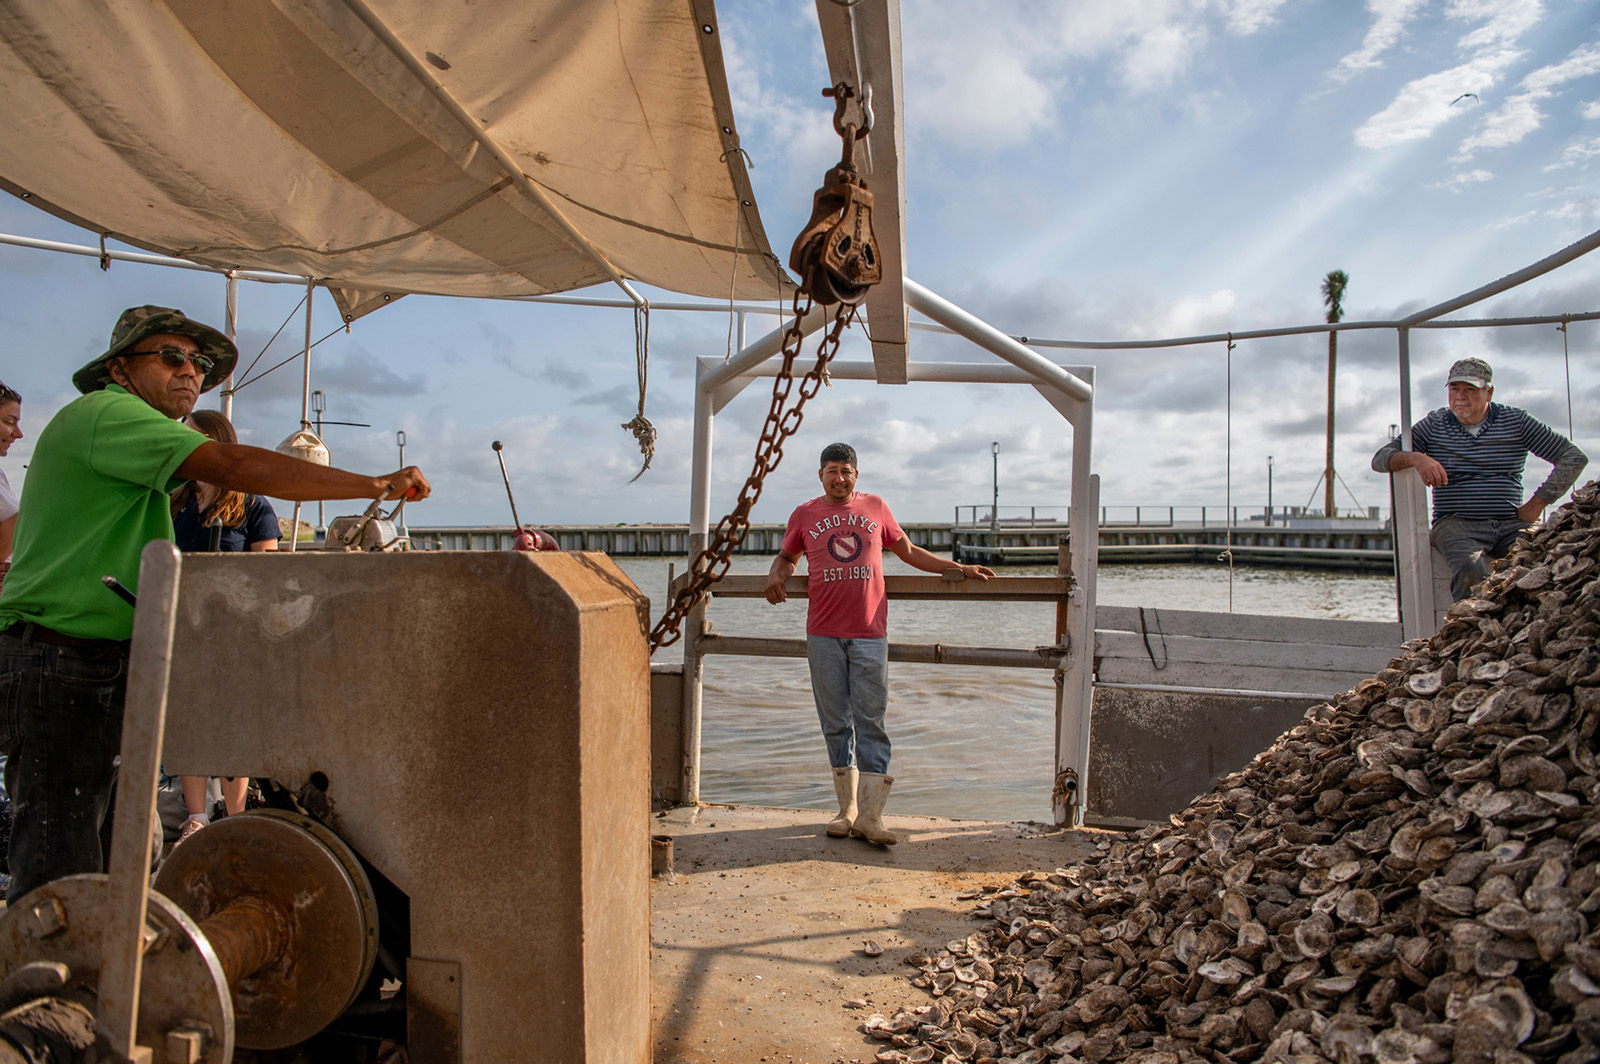 Captain Cadido Jiiron, Antonio Morales and Geraldo Carmargo transport a boat full of oyster shells offshore on April 30, 2024 to build a sustainable, non-harvestable, oyster reef near San Leon, Texas 